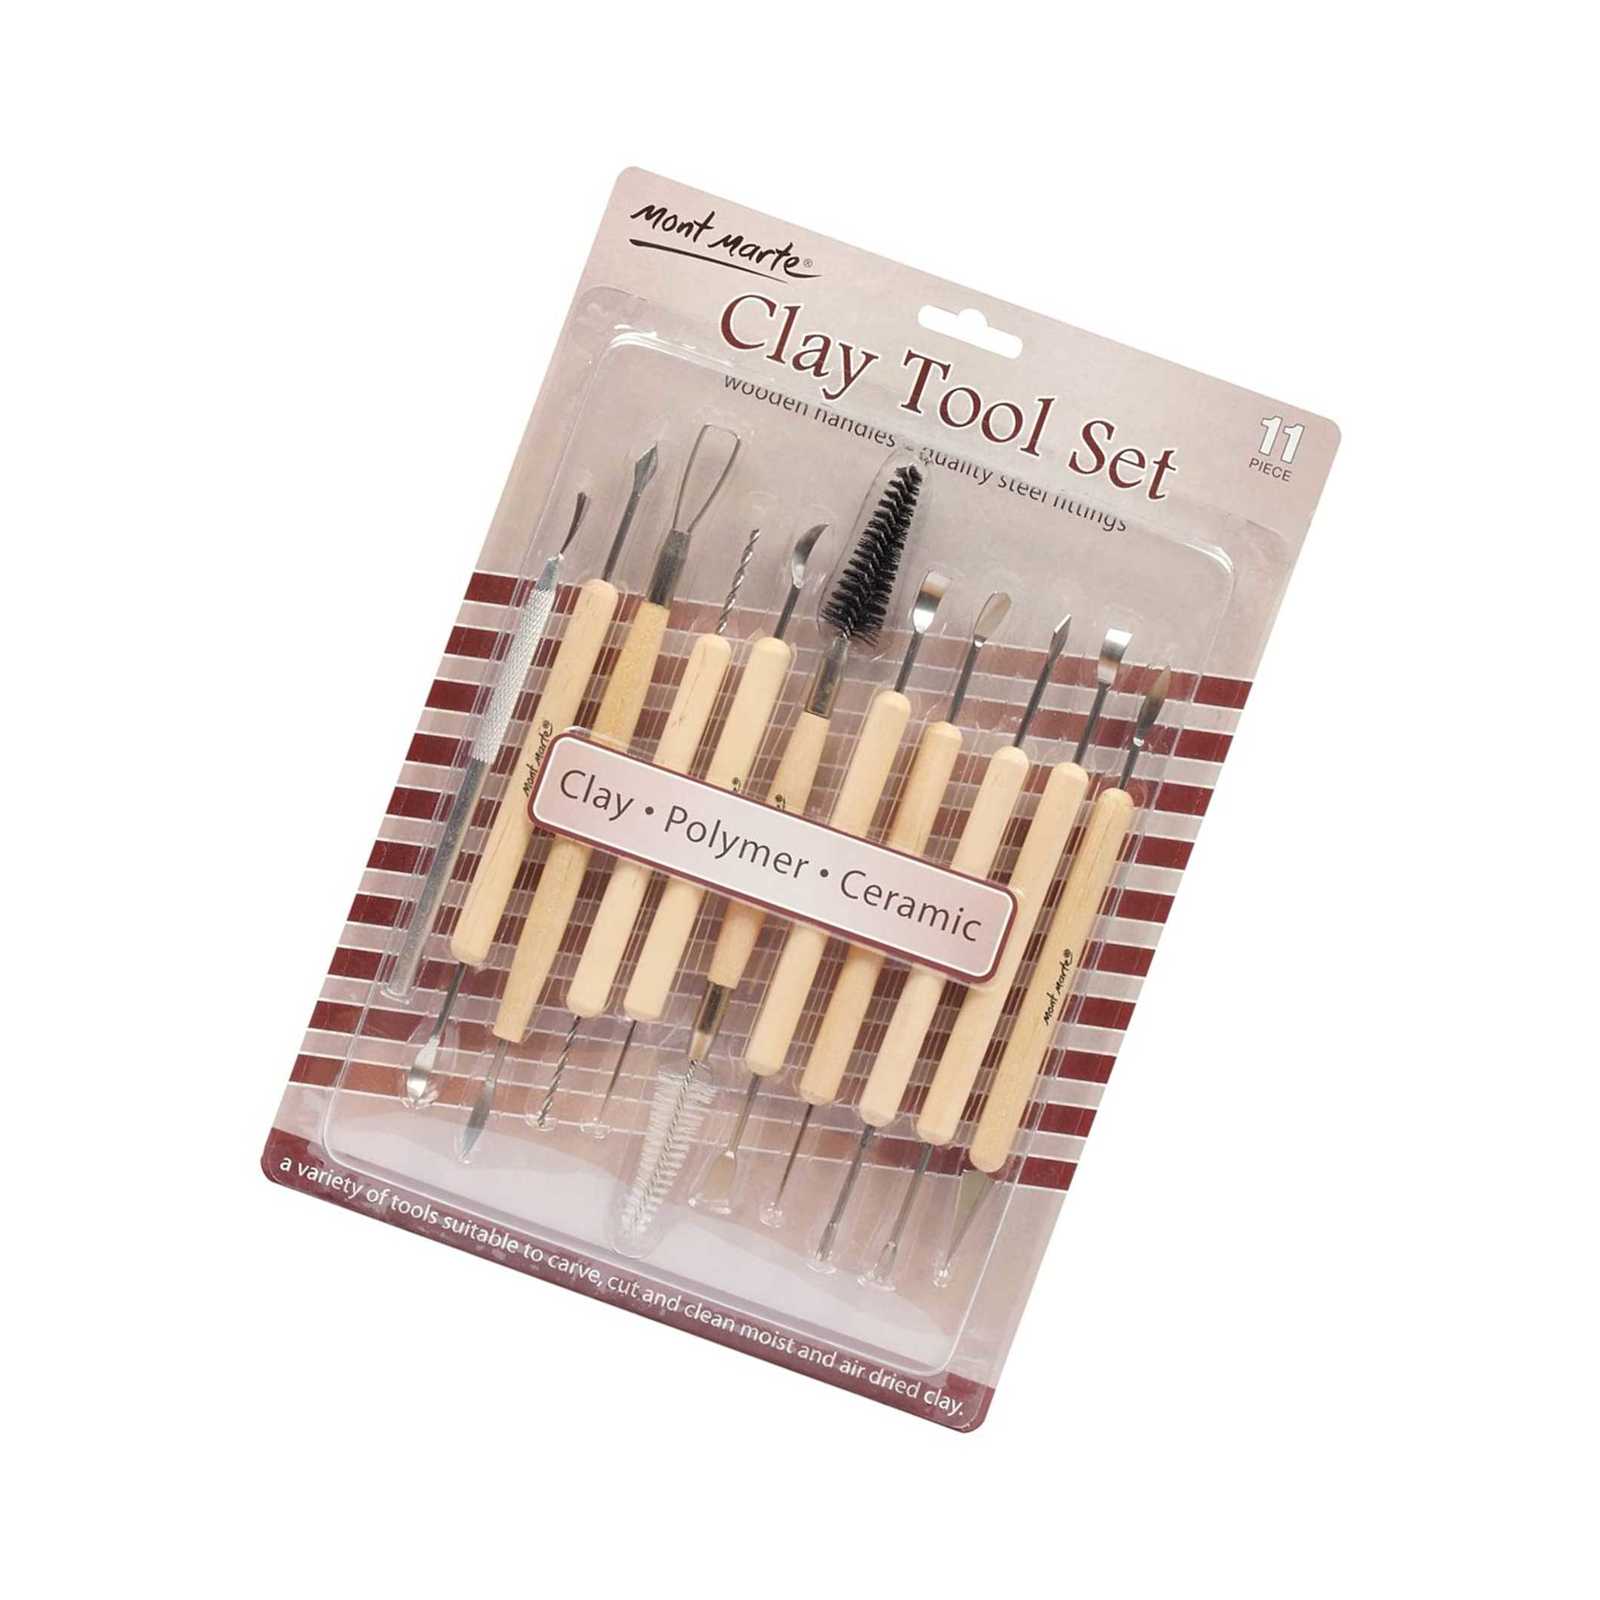 Clay Tool Set, 11 Piece. Ion Of Clay Tools To Create Texture, Smooth, Cut And